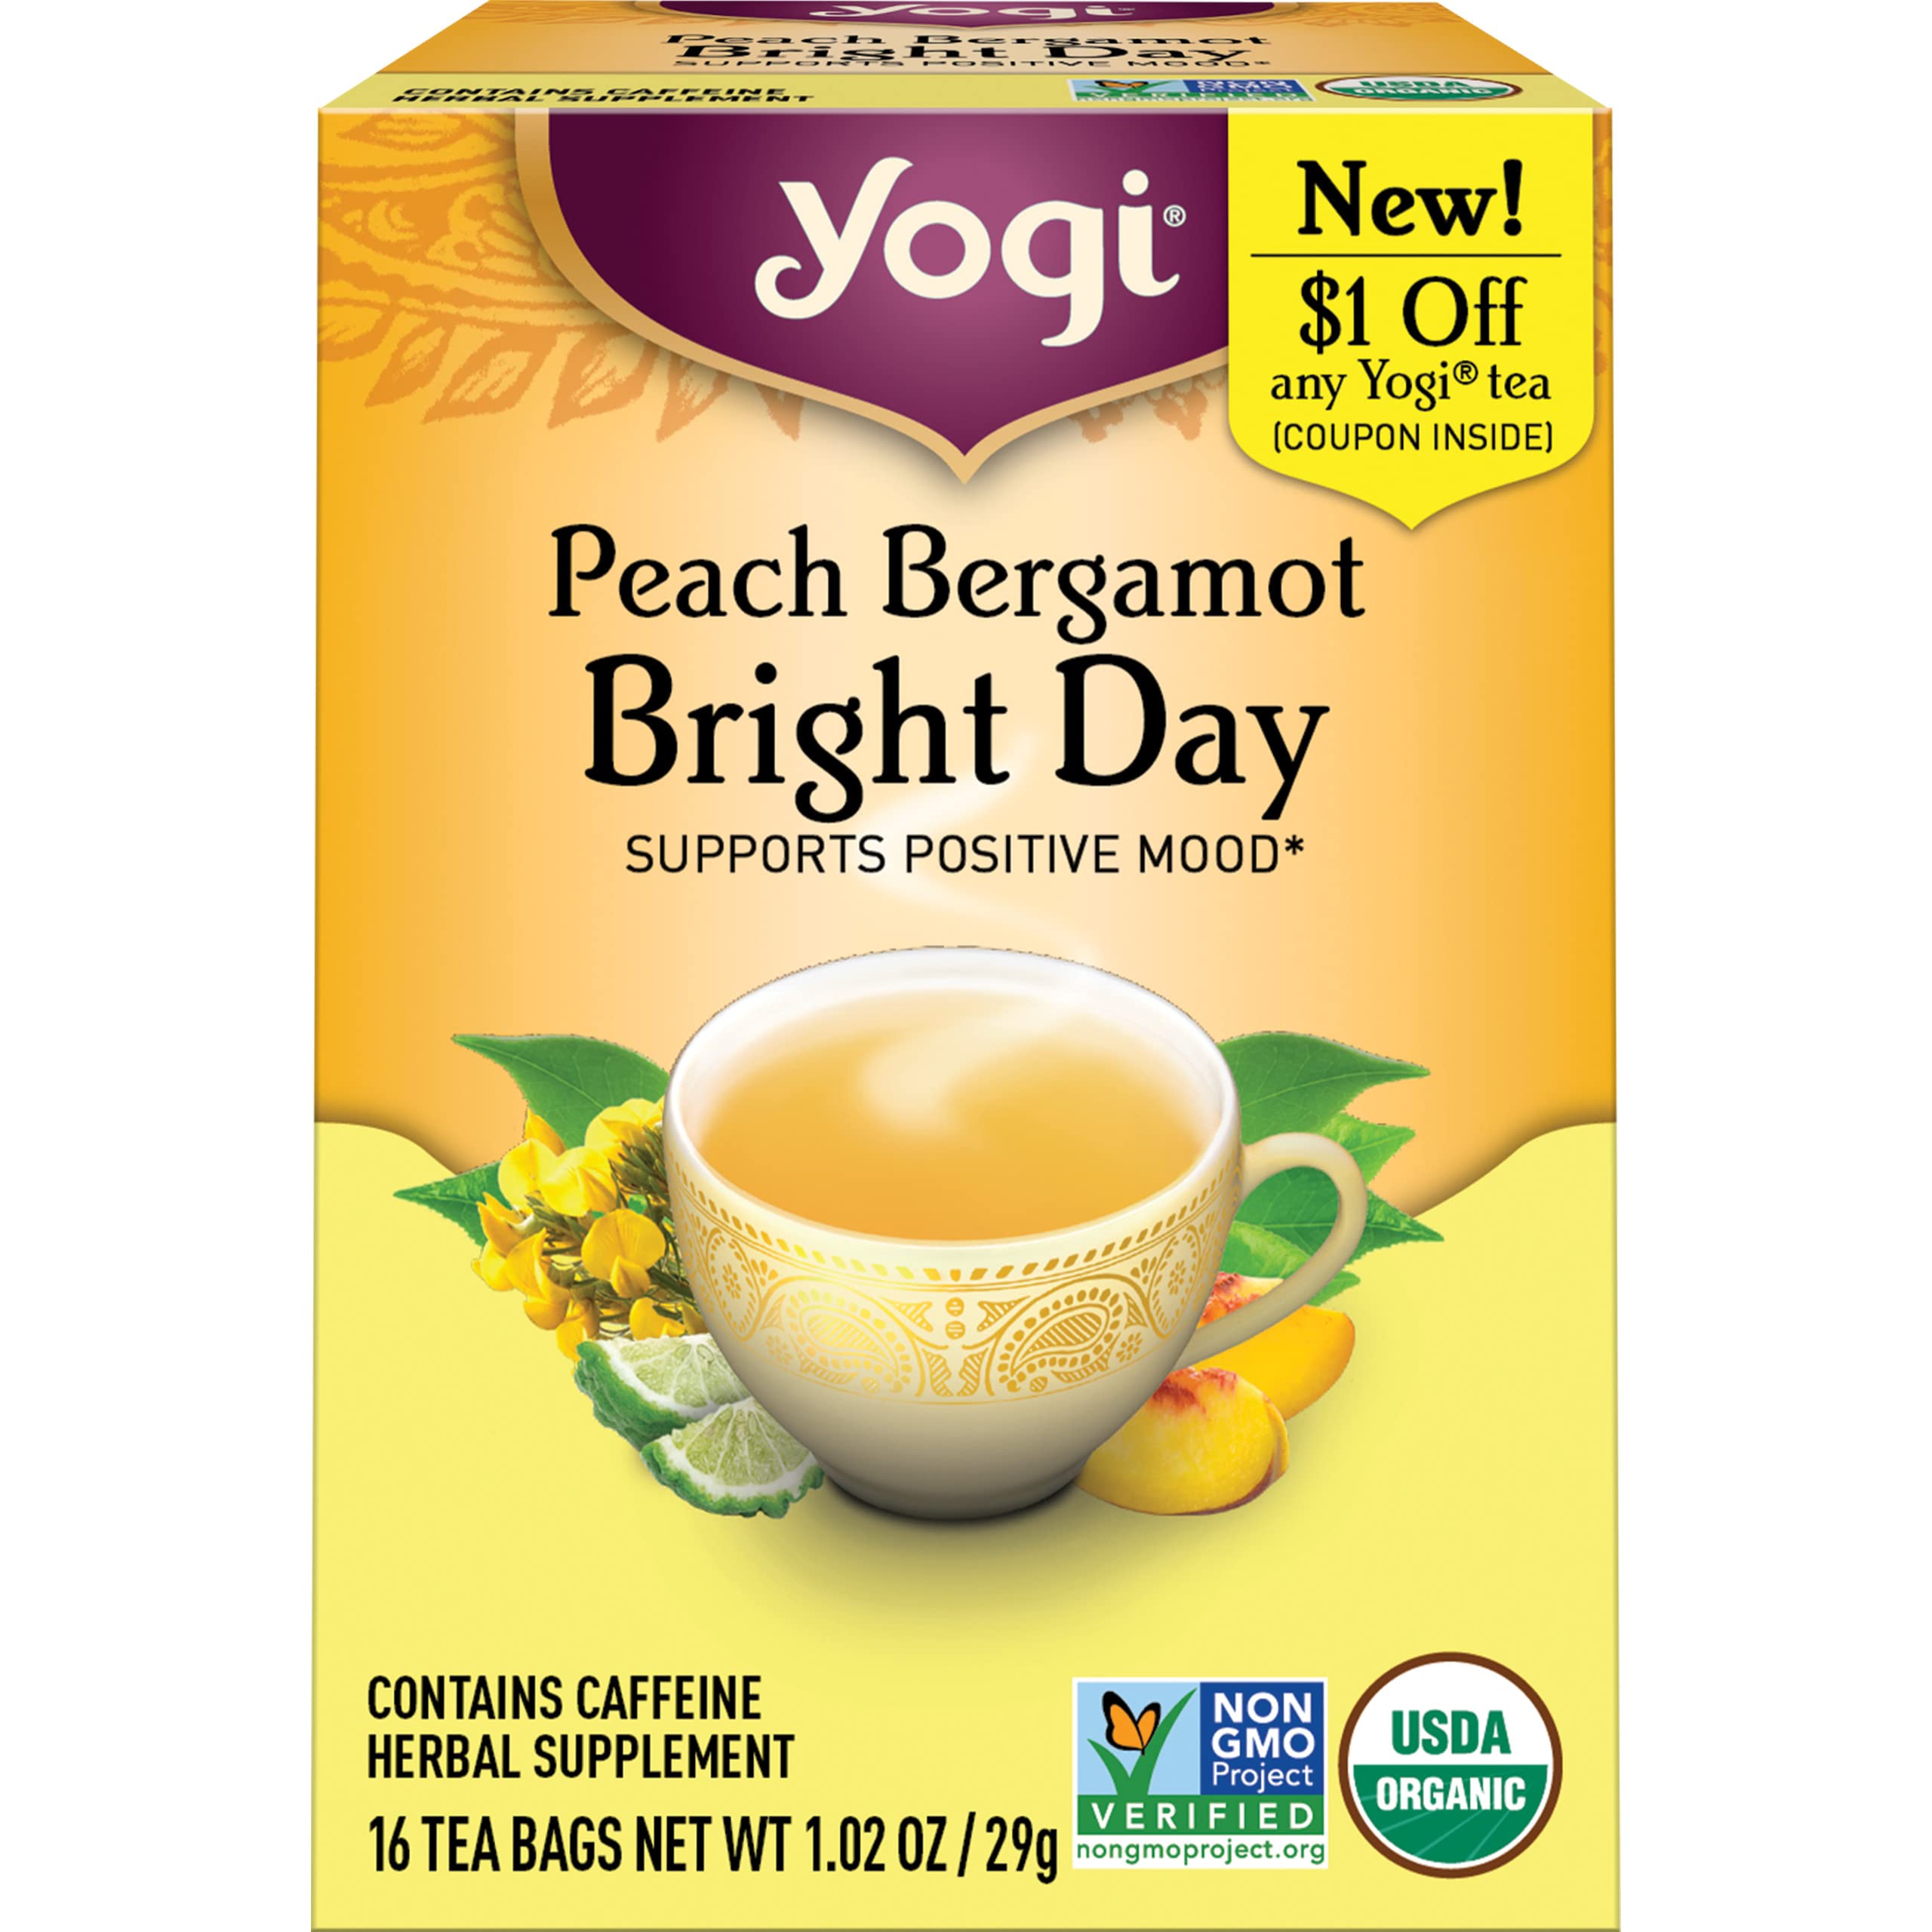 Yogi Tea - Peach Bergamot Bright Day Tea (4 Pack) - Supports Elevated Mood  and Energy Levels - With Oolong and Green Tea Extract - Contains Caffeine -  64 Organic Tea Bags 16 Count (Pack of 4)